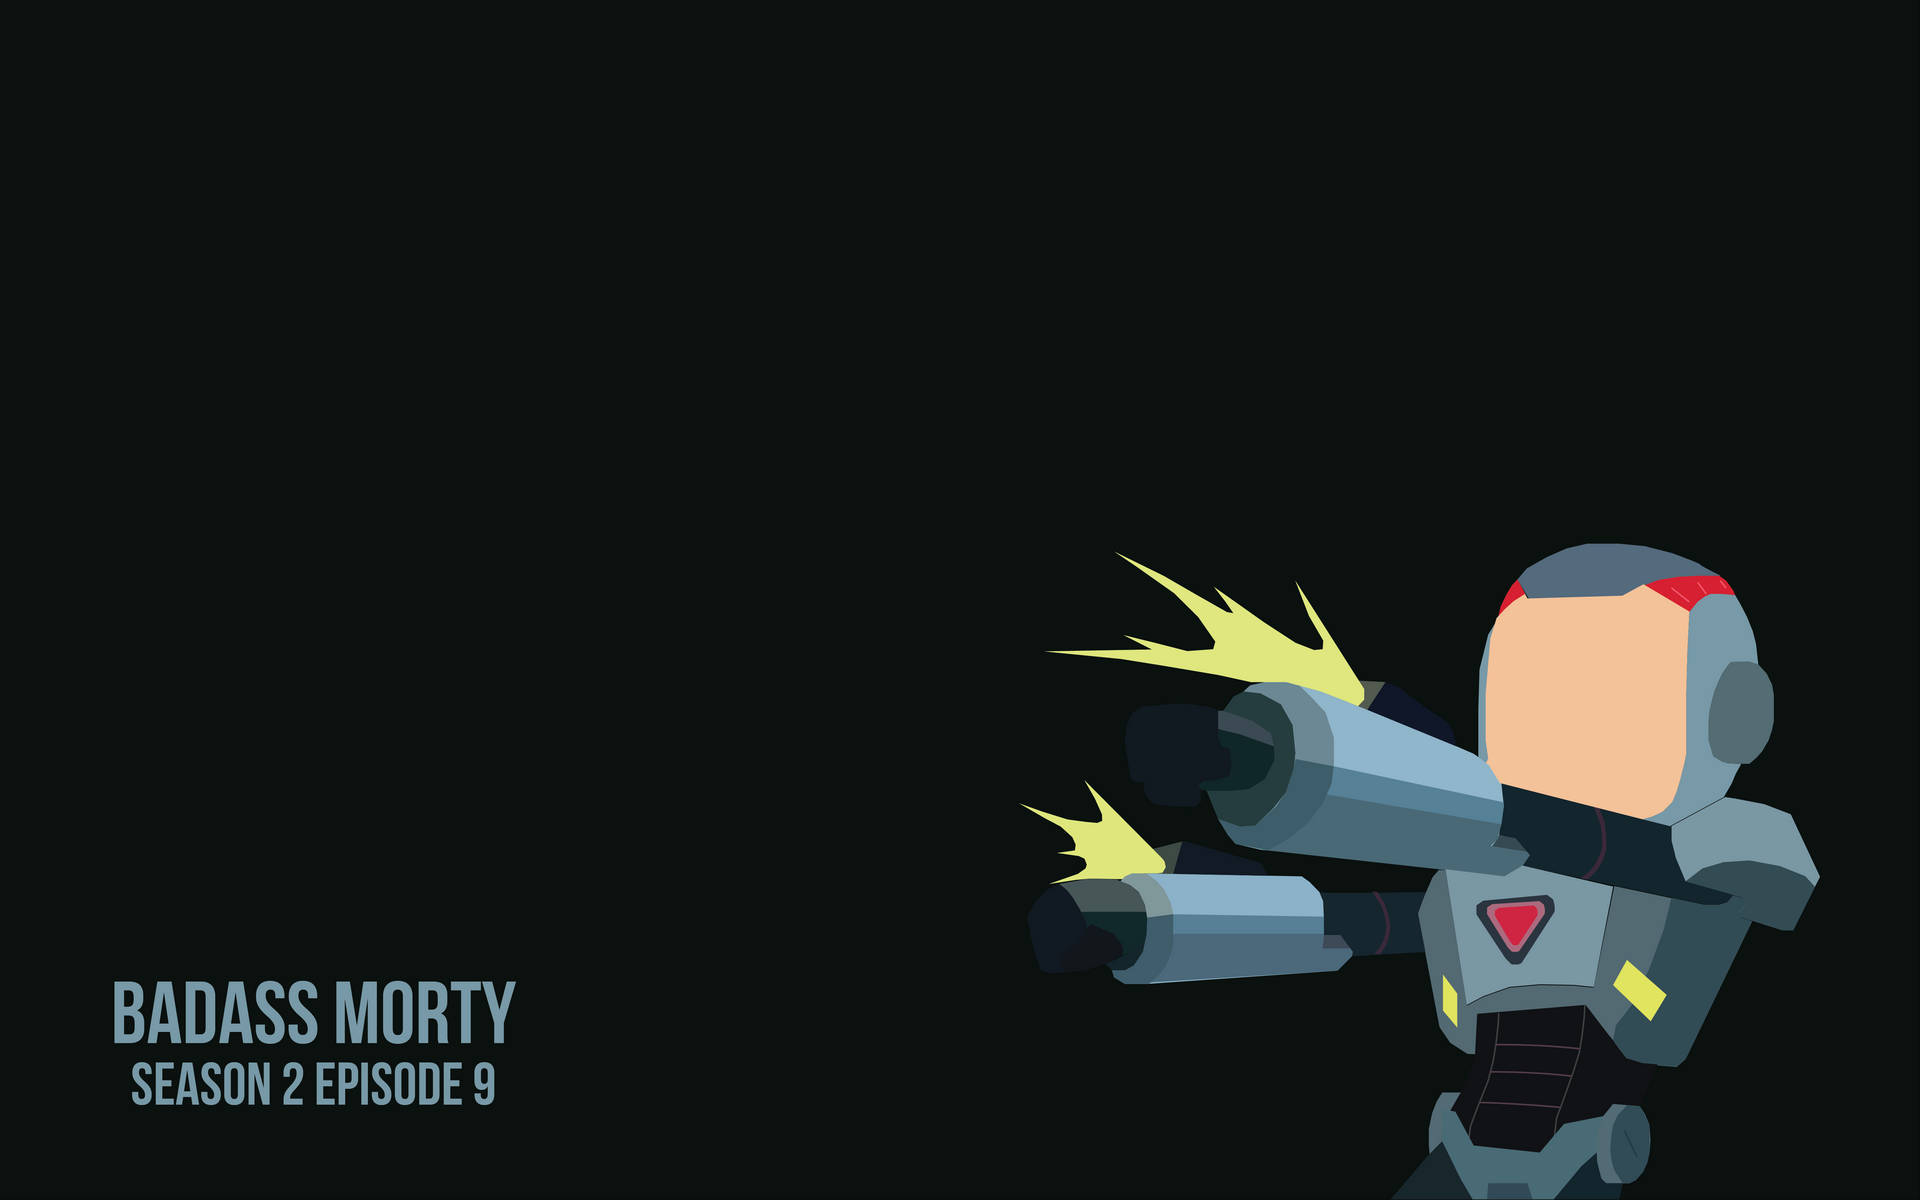 Rick And Morty PC 4K Badass Morty Wallpaper